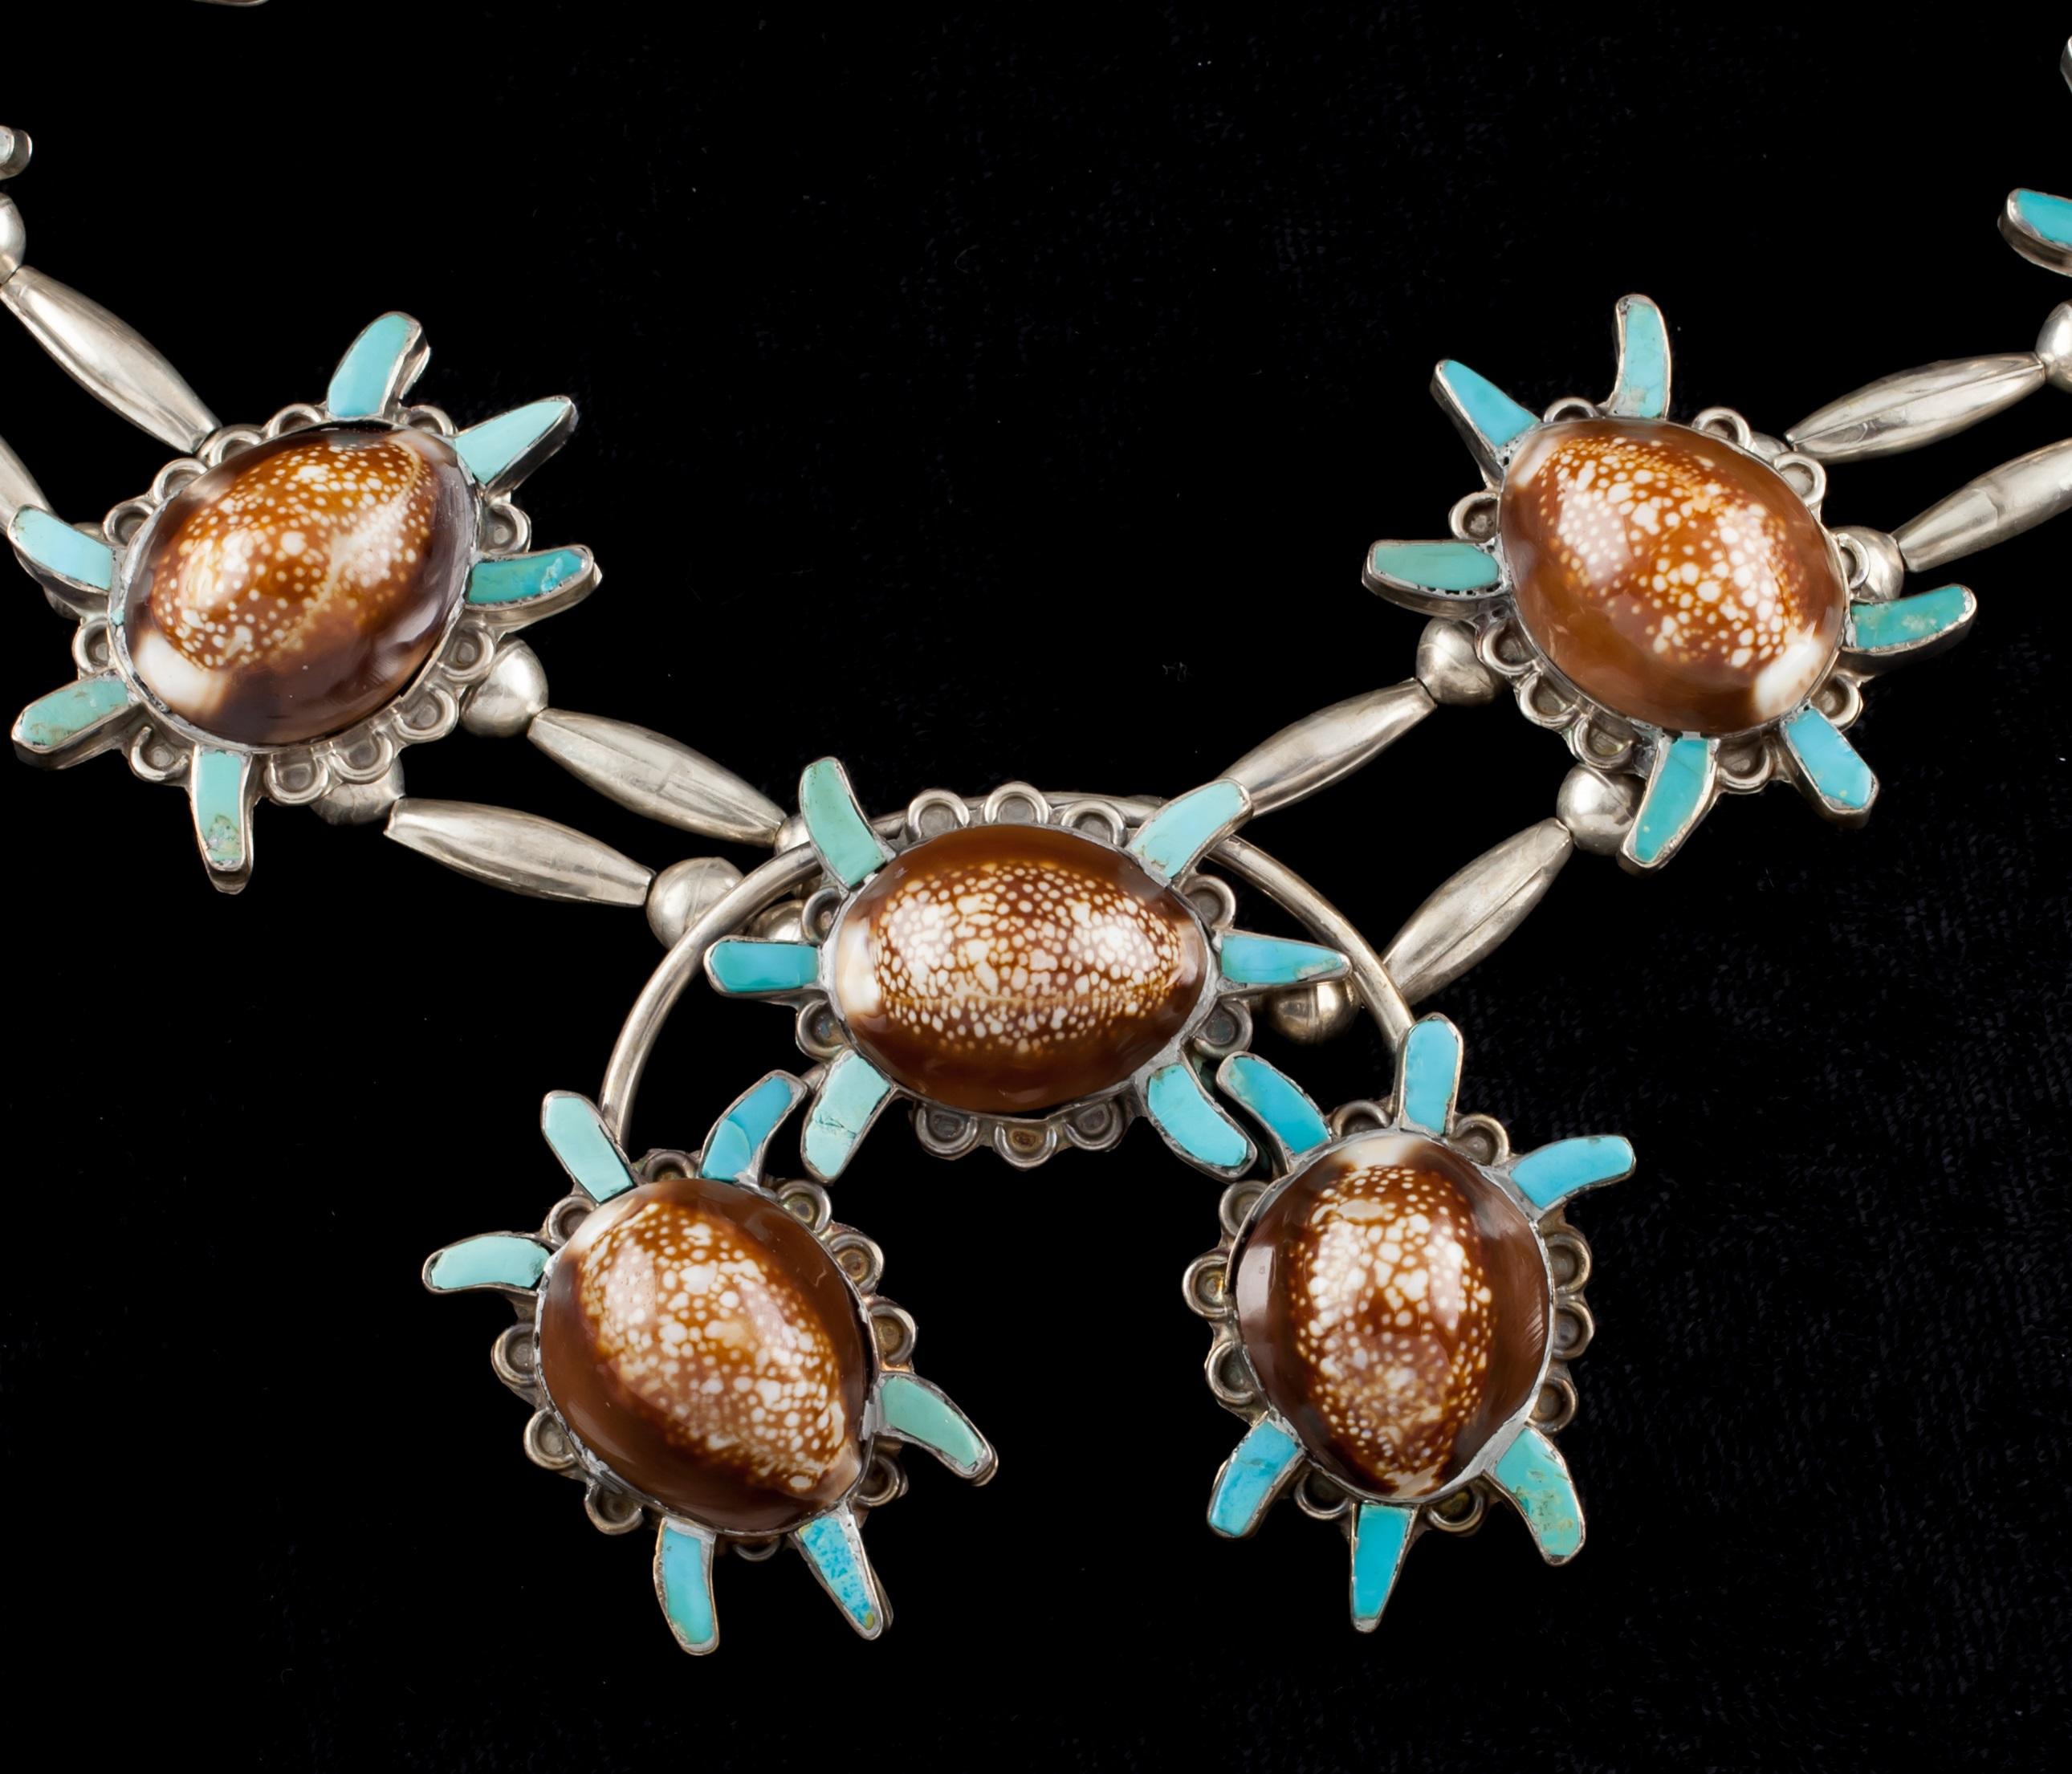 Sterling Silver Native American Squash Naja Necklace 
Accented with 8 brown shells qurrounded by turquoise pieces and squash blossoms (excluding centerpiece)
Sterling silver bead double strand necklace
Center piece measures approximately: 2.5